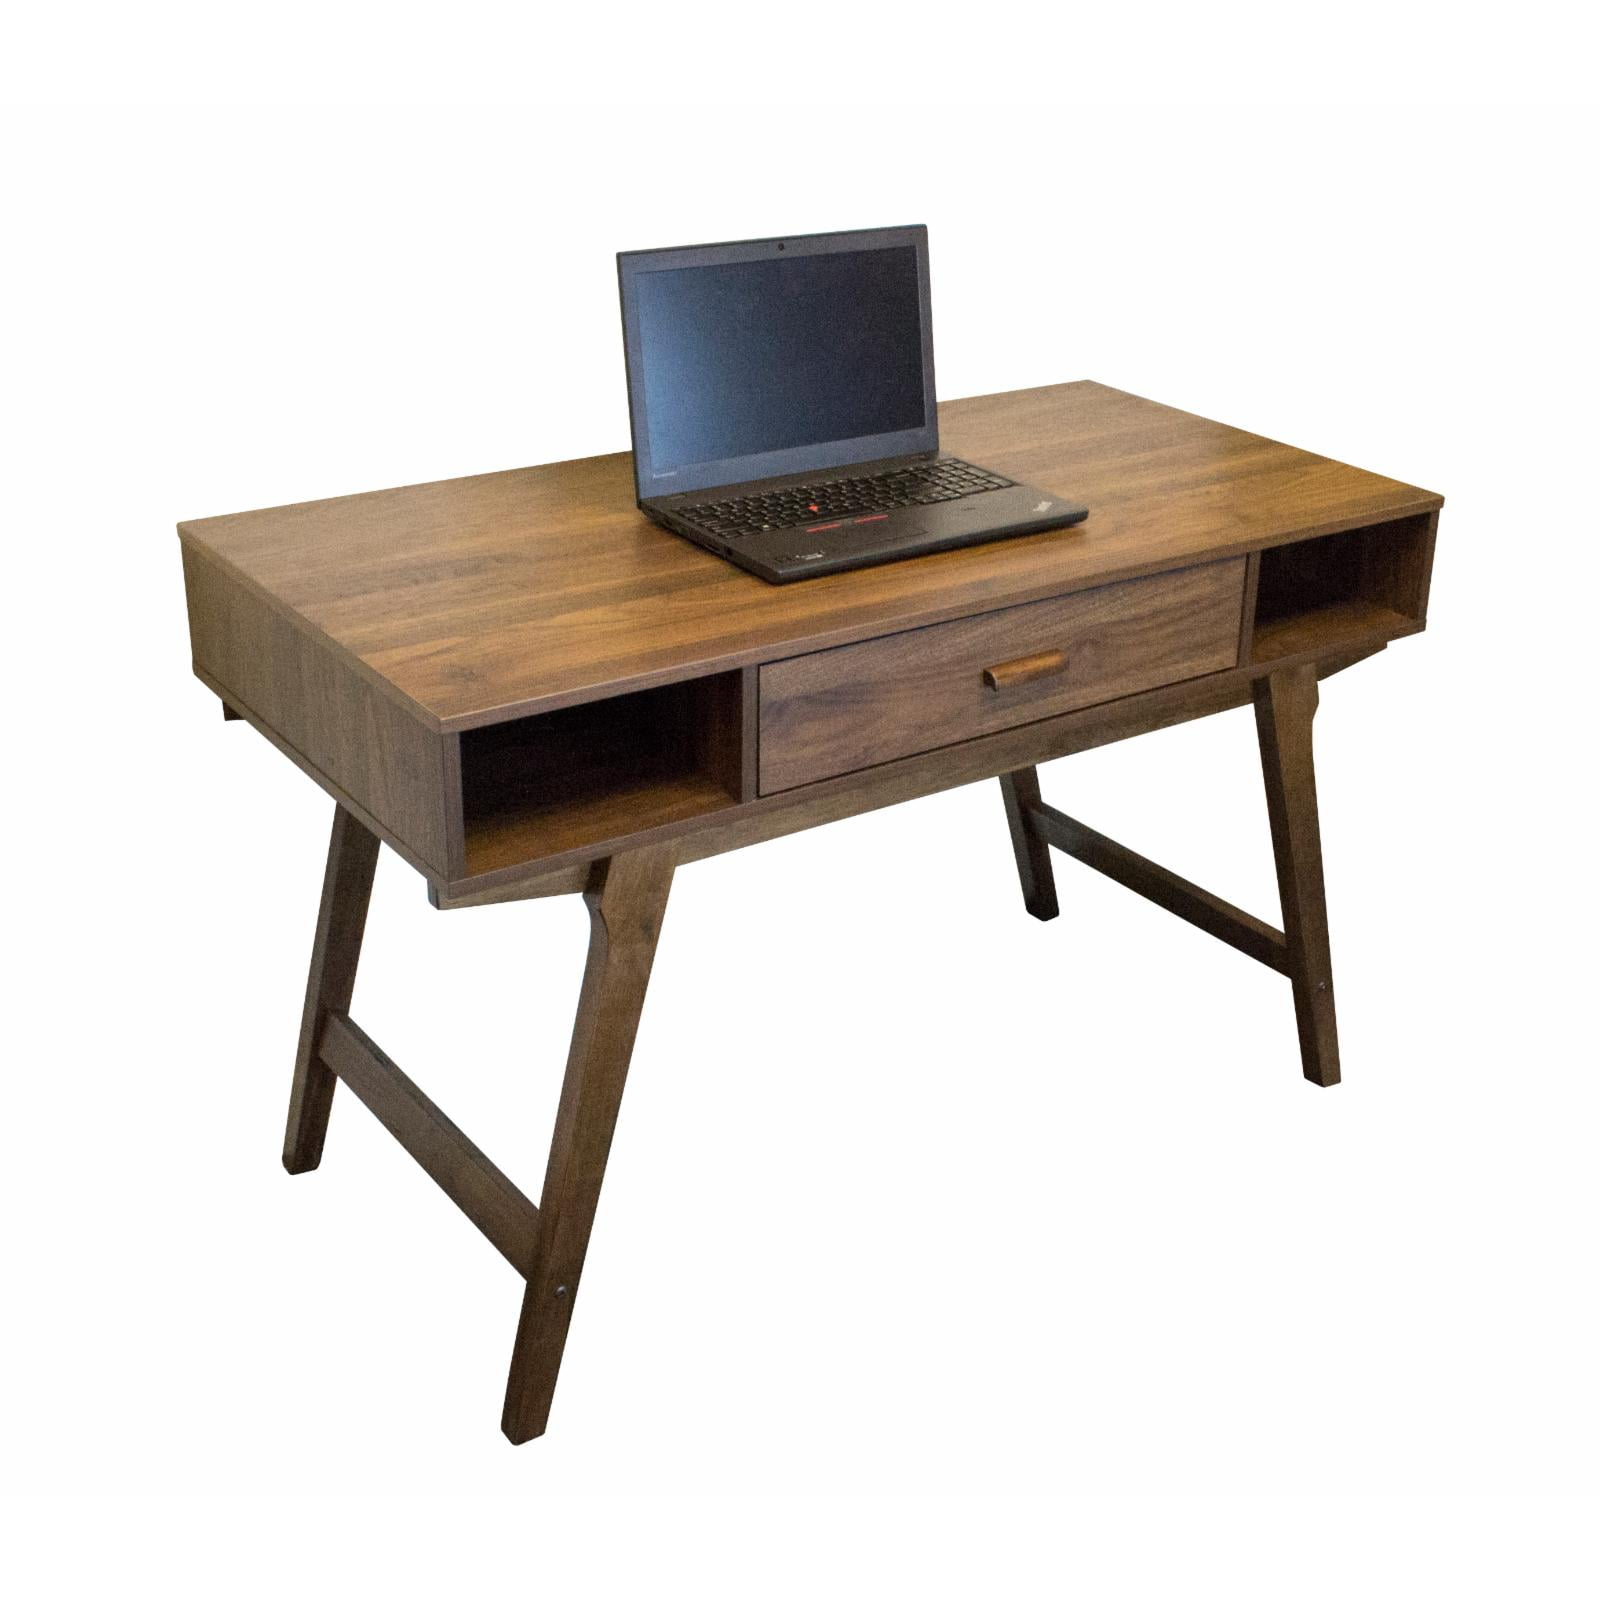 Picture of American Furniture Classics 41201 30 x 47.25 x 23.5 in. OS Home & Office Mid Century Desk with One Drawer & Sturdy Legs